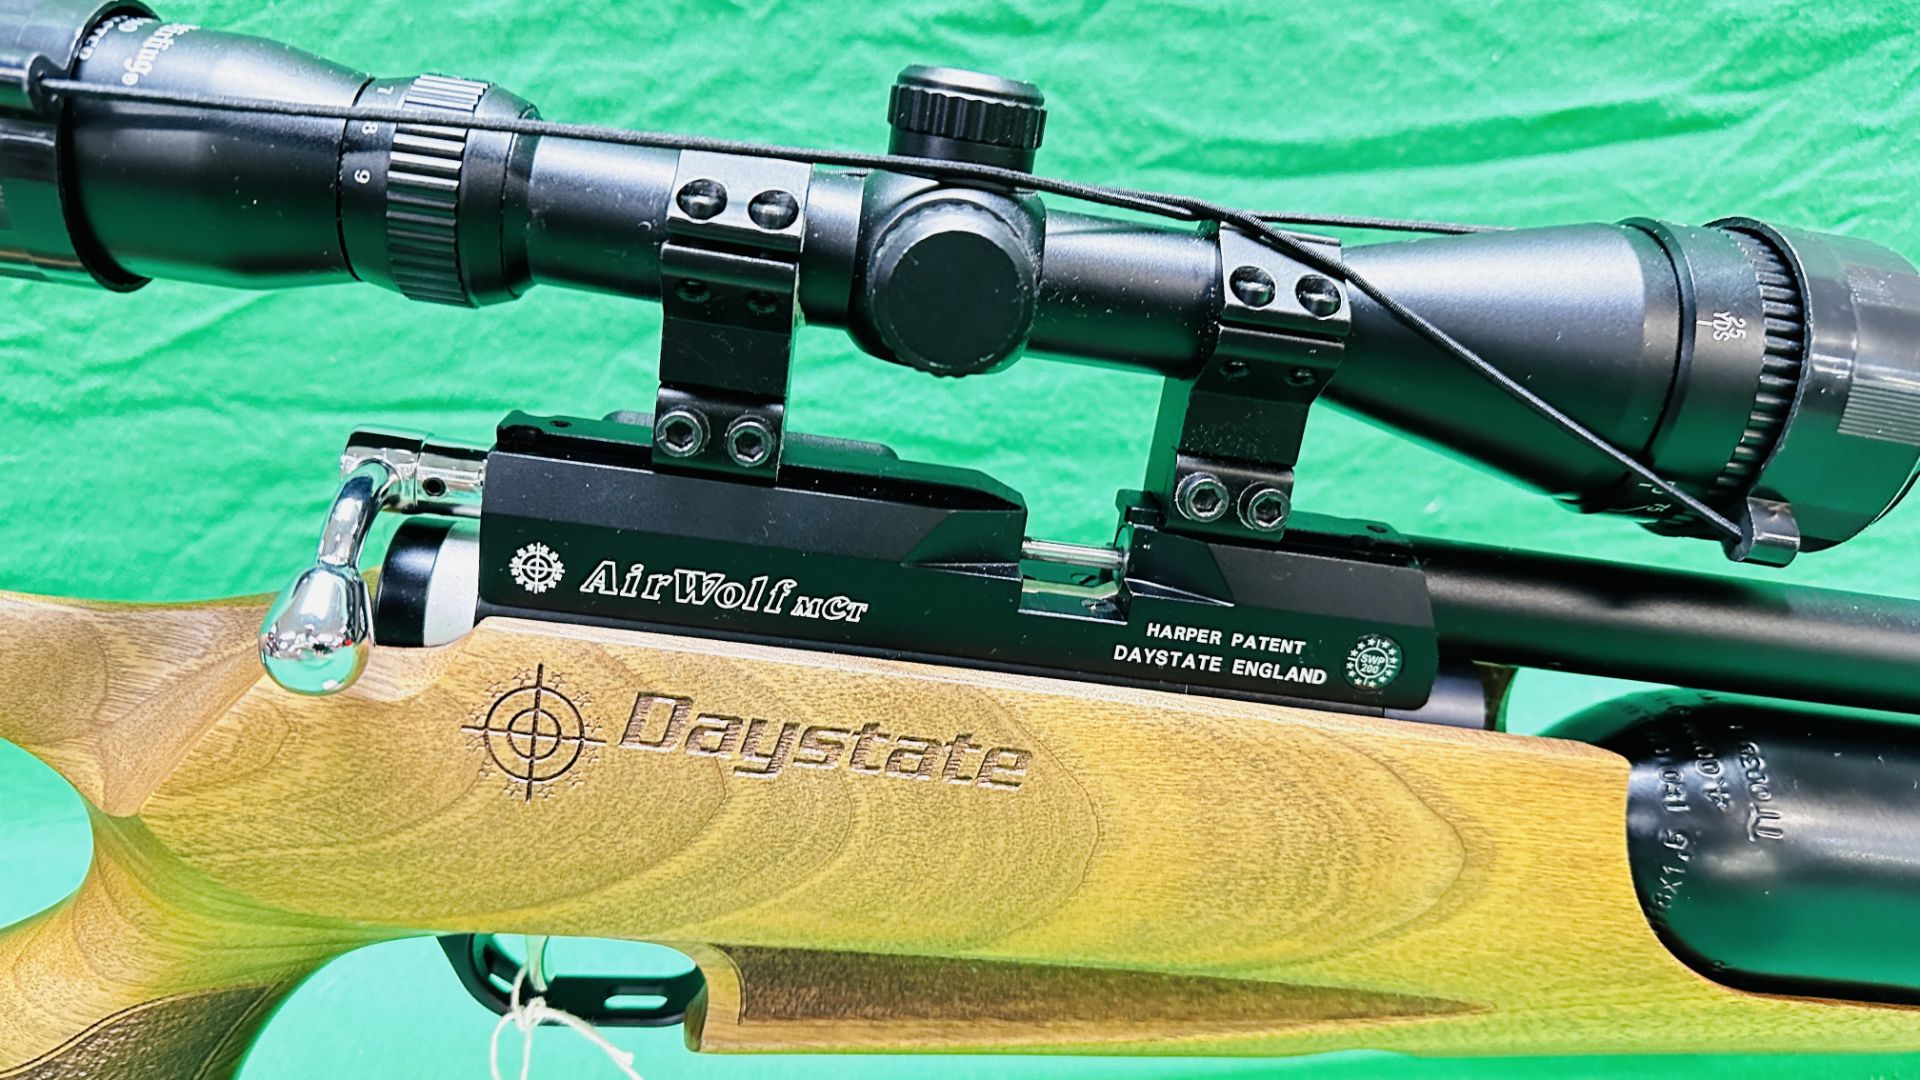 DAYSTATE AIRWOLF MCT DIGITAL PCP MULTI SHOT AIR RIFLE COMPLETE WITH 4 10 SHOT MAGAZINES, - Image 3 of 25